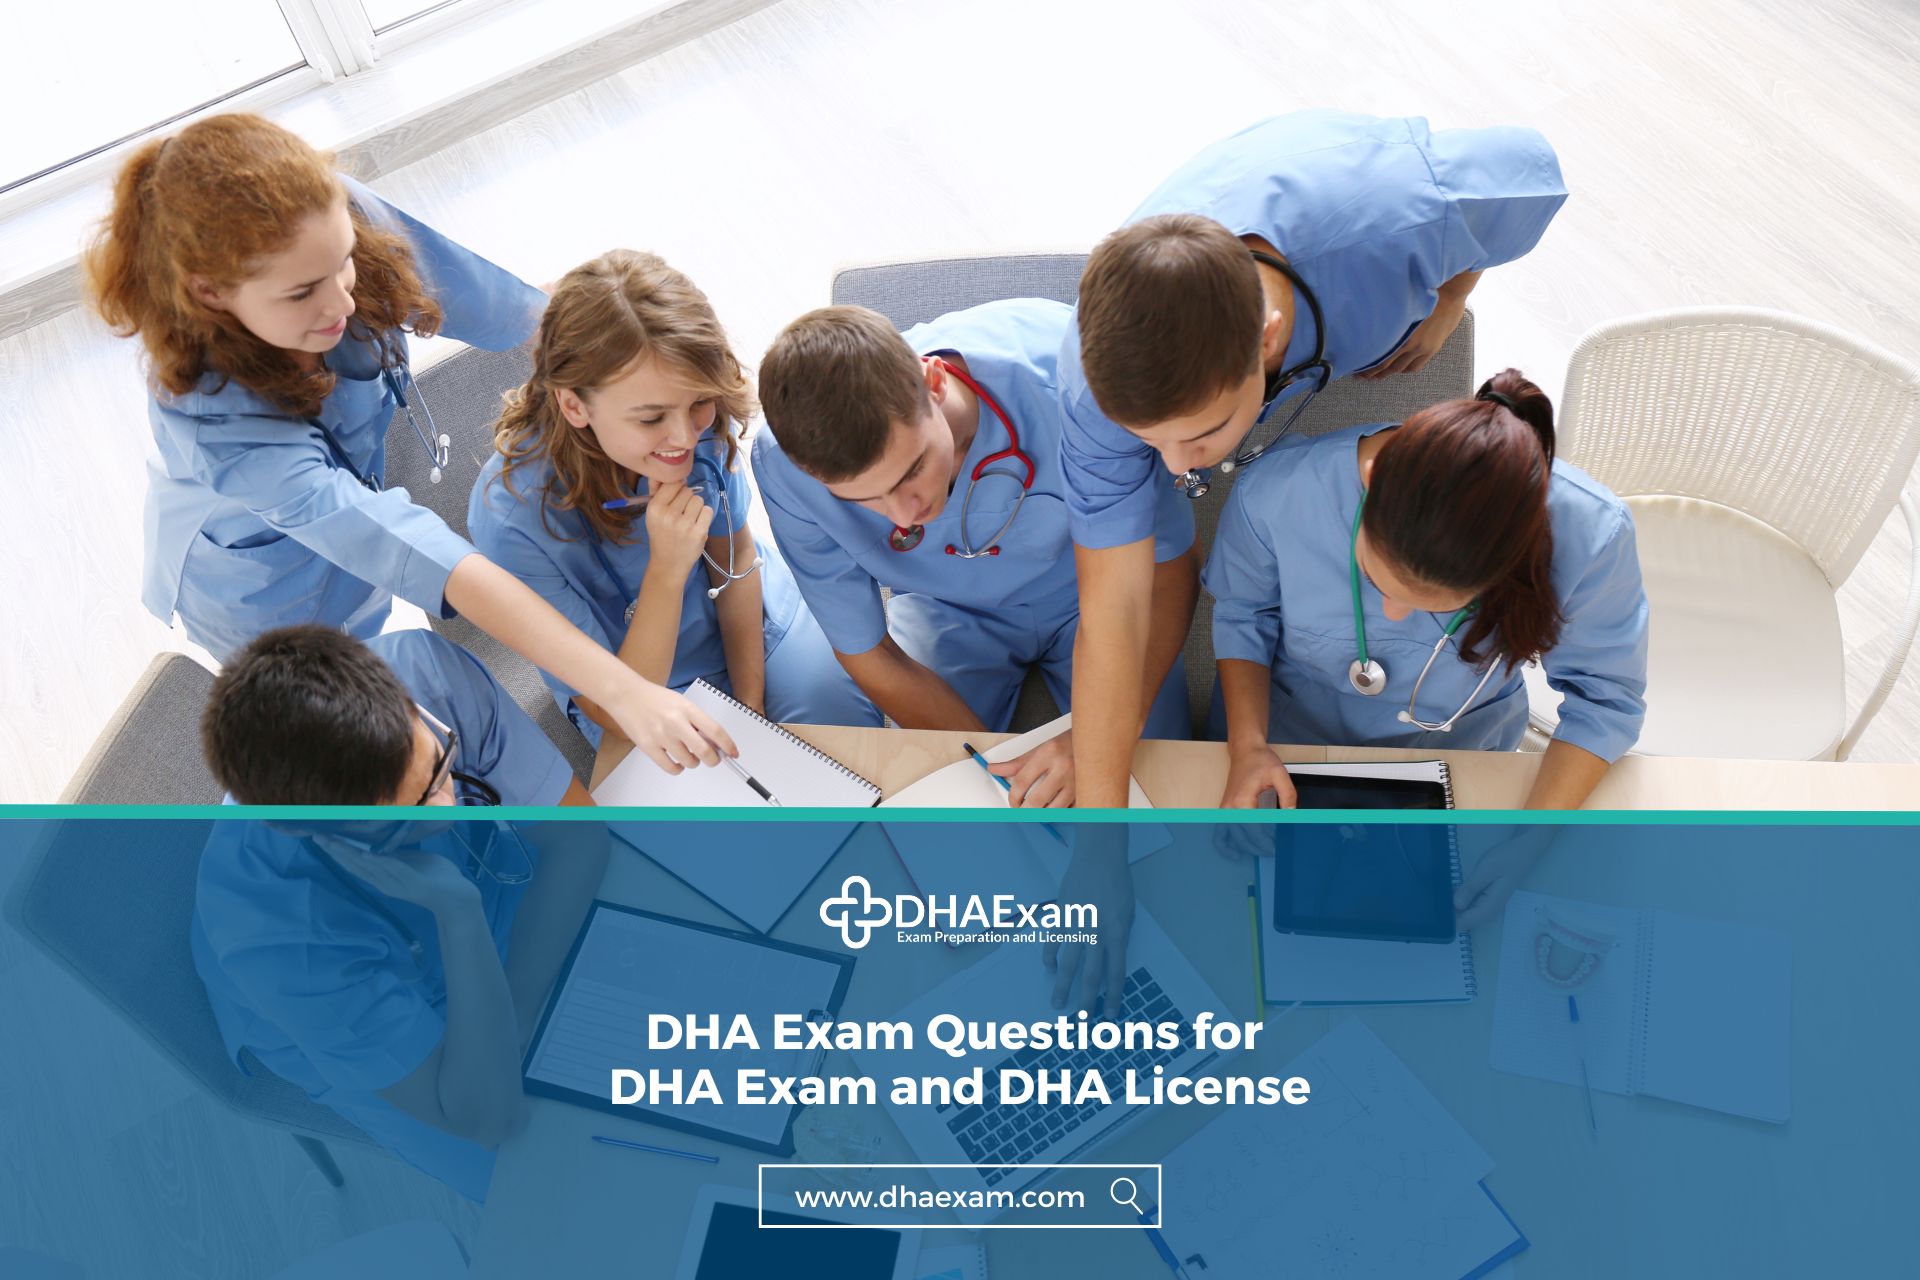 DHA Exam Questions for DHA Exam and DHA License